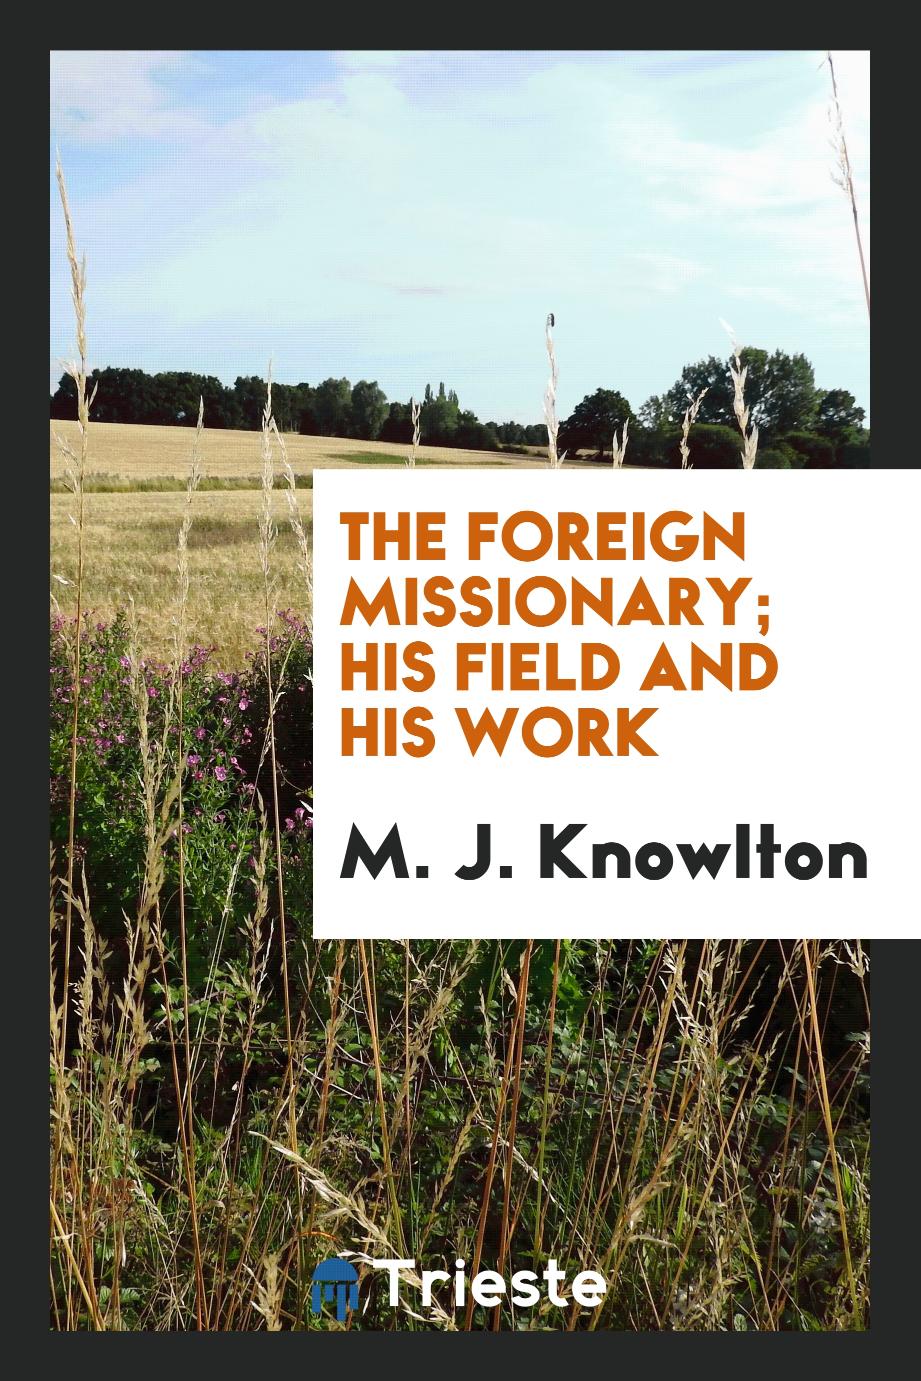 The foreign missionary; his field and his work